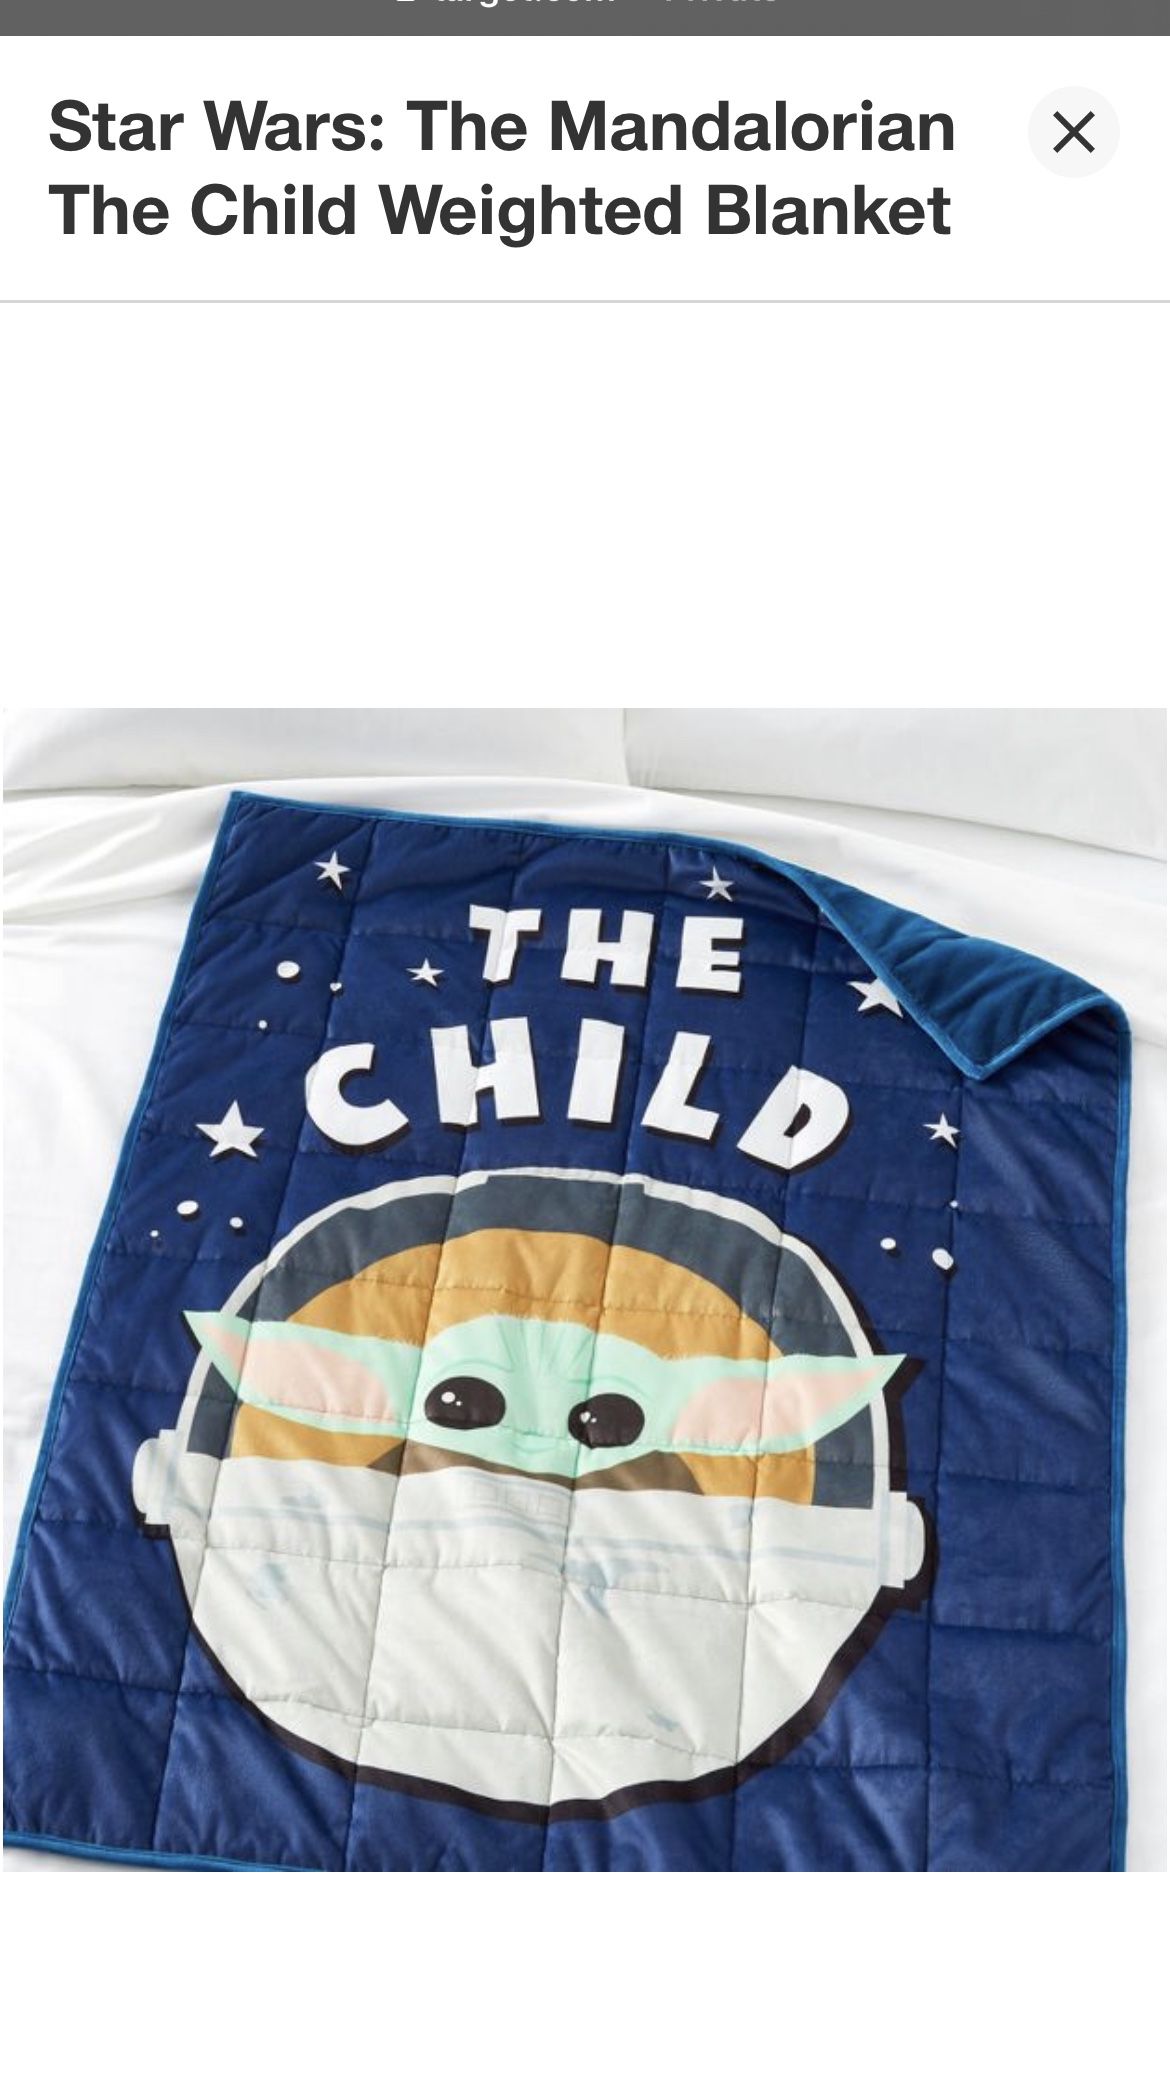 Star Wars: The Mandalorian The Child Weighted Blanket